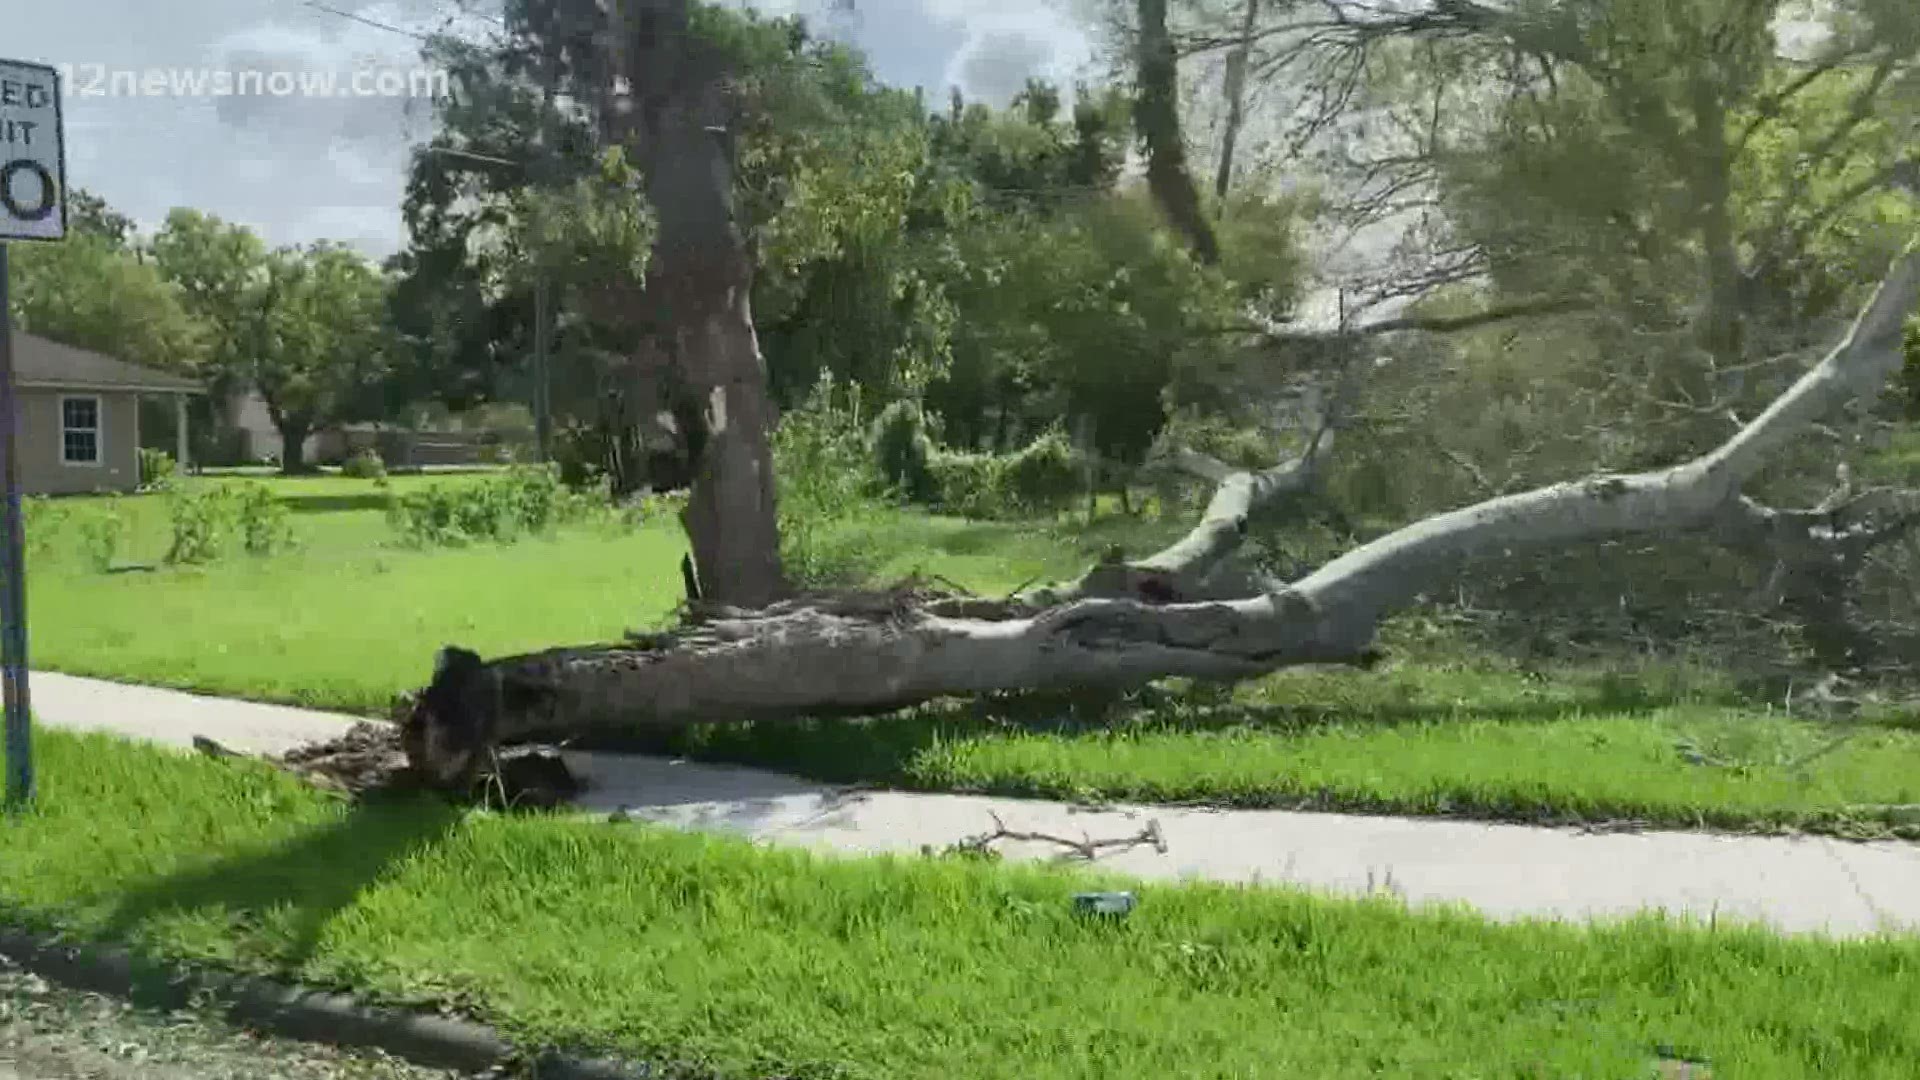 Trees were toppled, power lights were disconnected and some businesses were damaged after heavy winds hit the area.